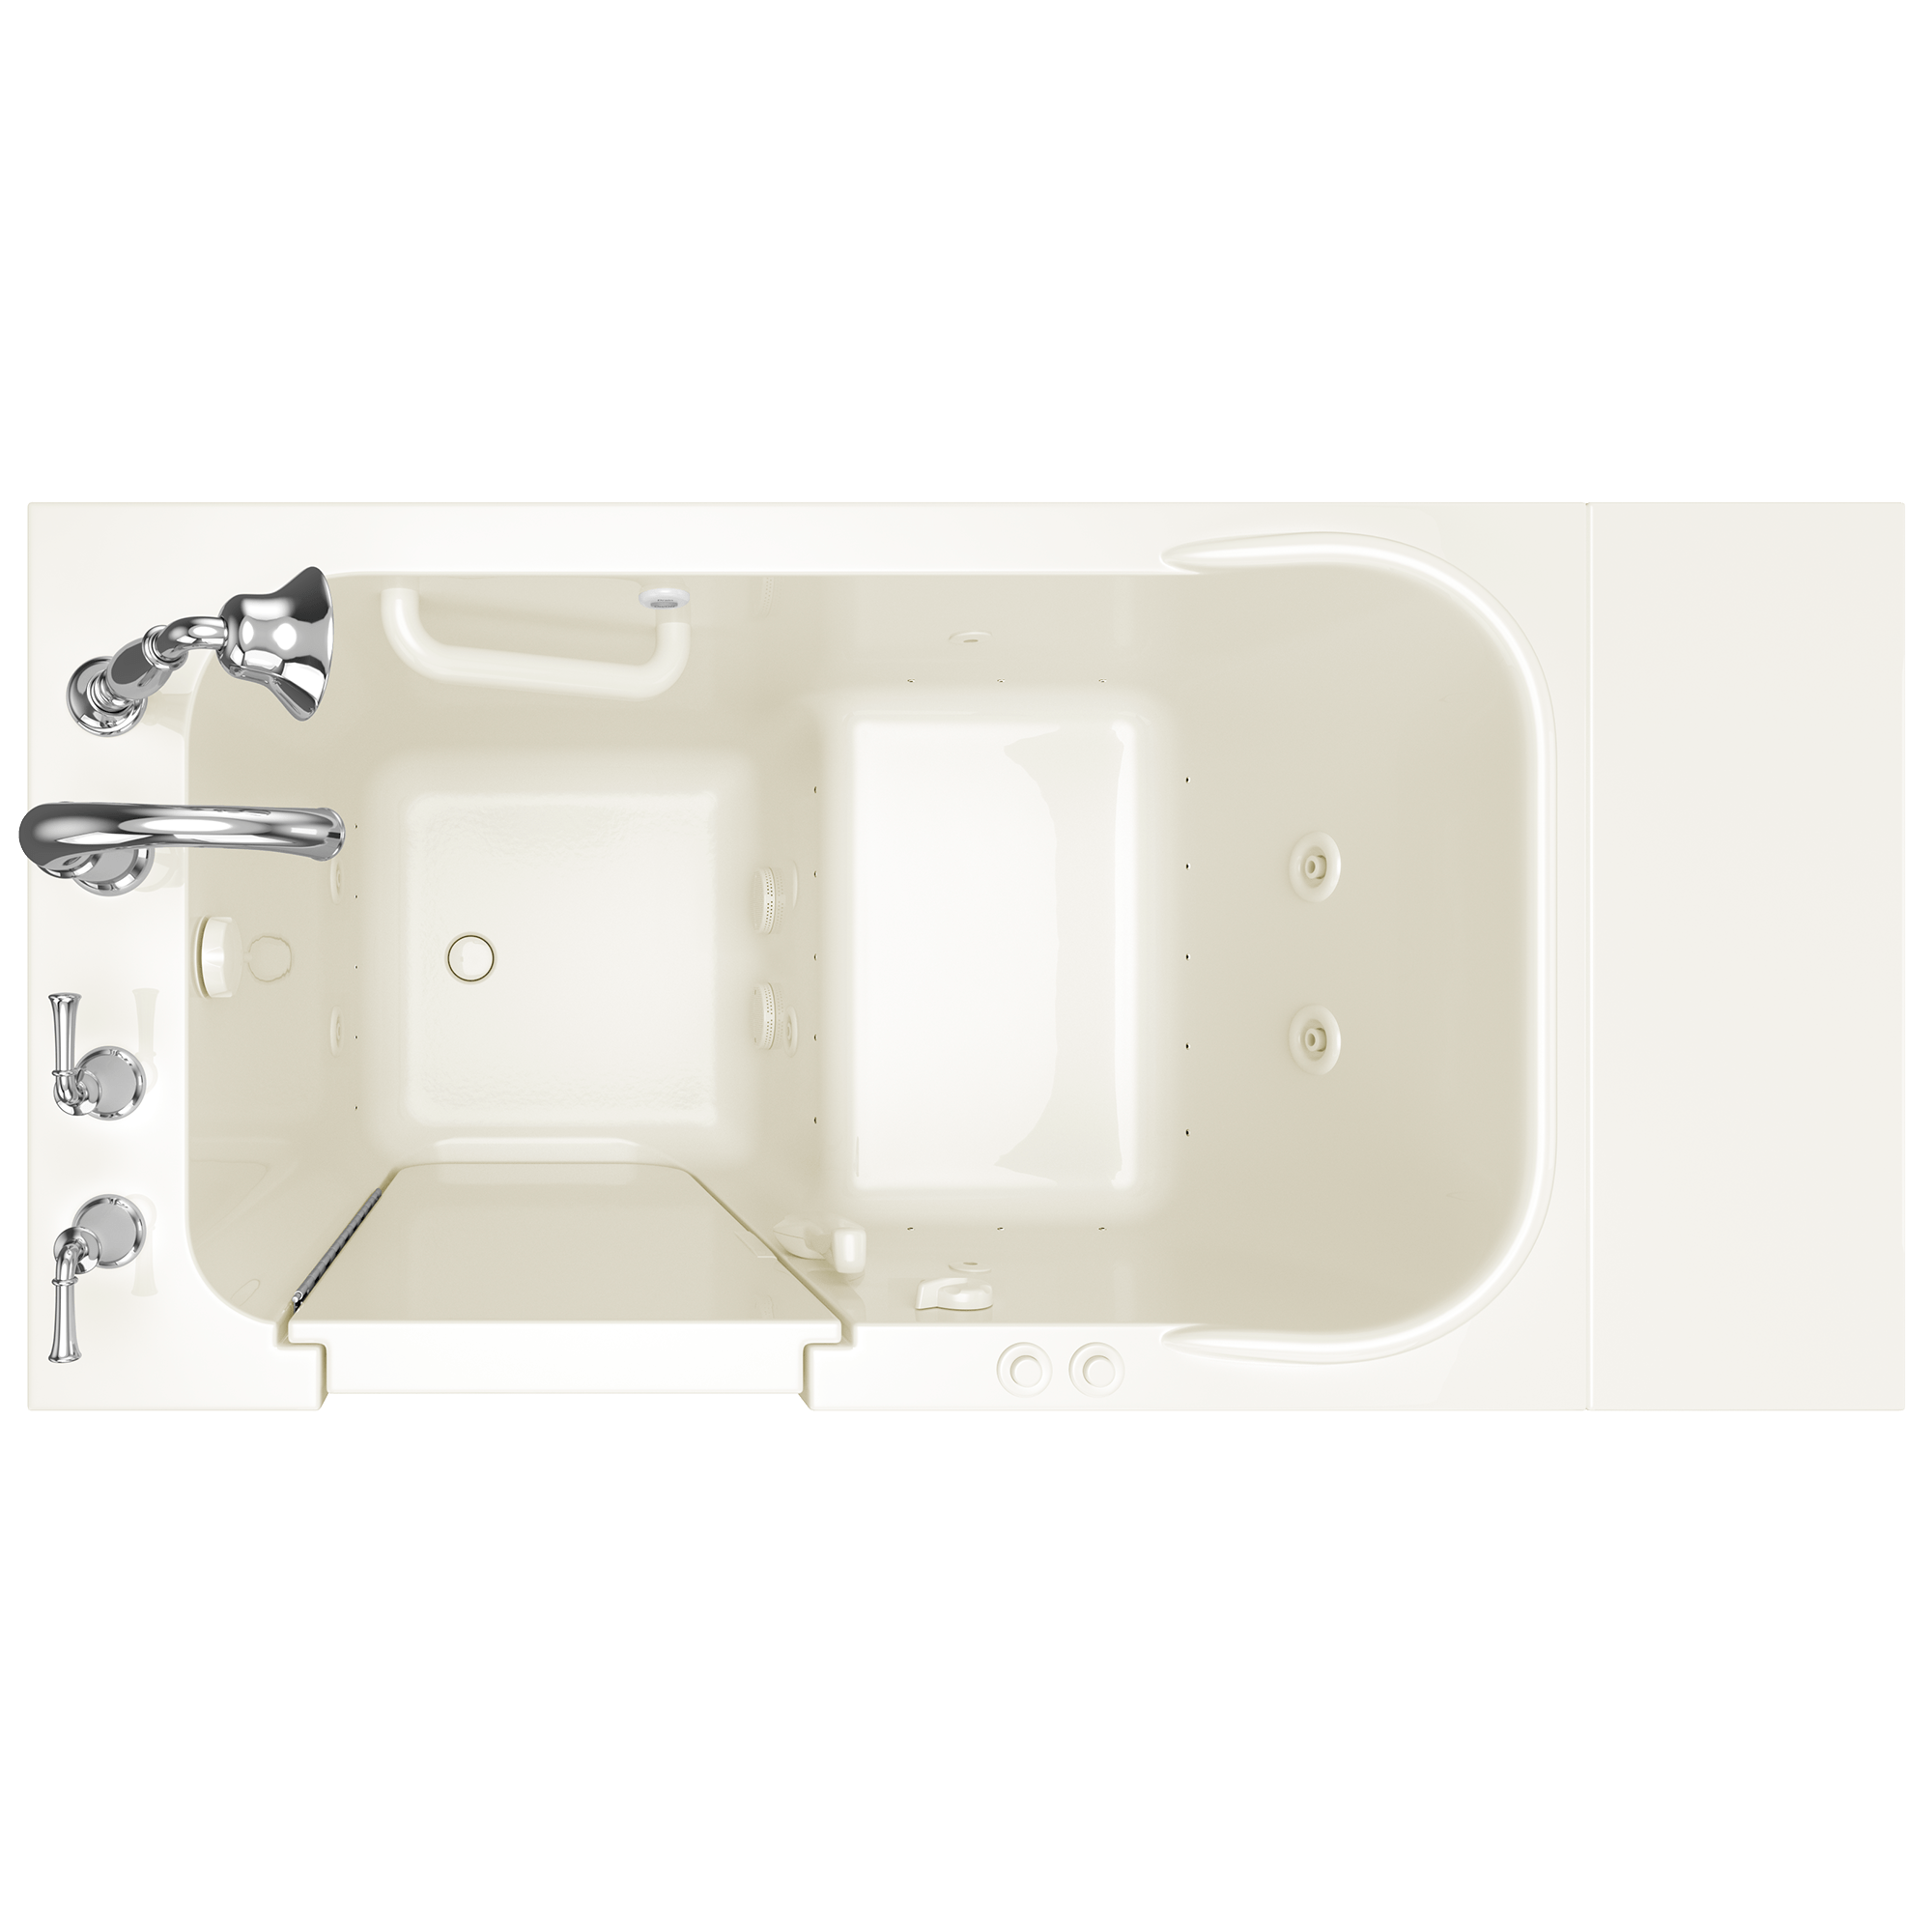 Gelcoat Value Series 28 x 48-Inch Walk-in Tub With Combination Air Spa and Whirlpool Systems - Left-Hand Drain With Faucet